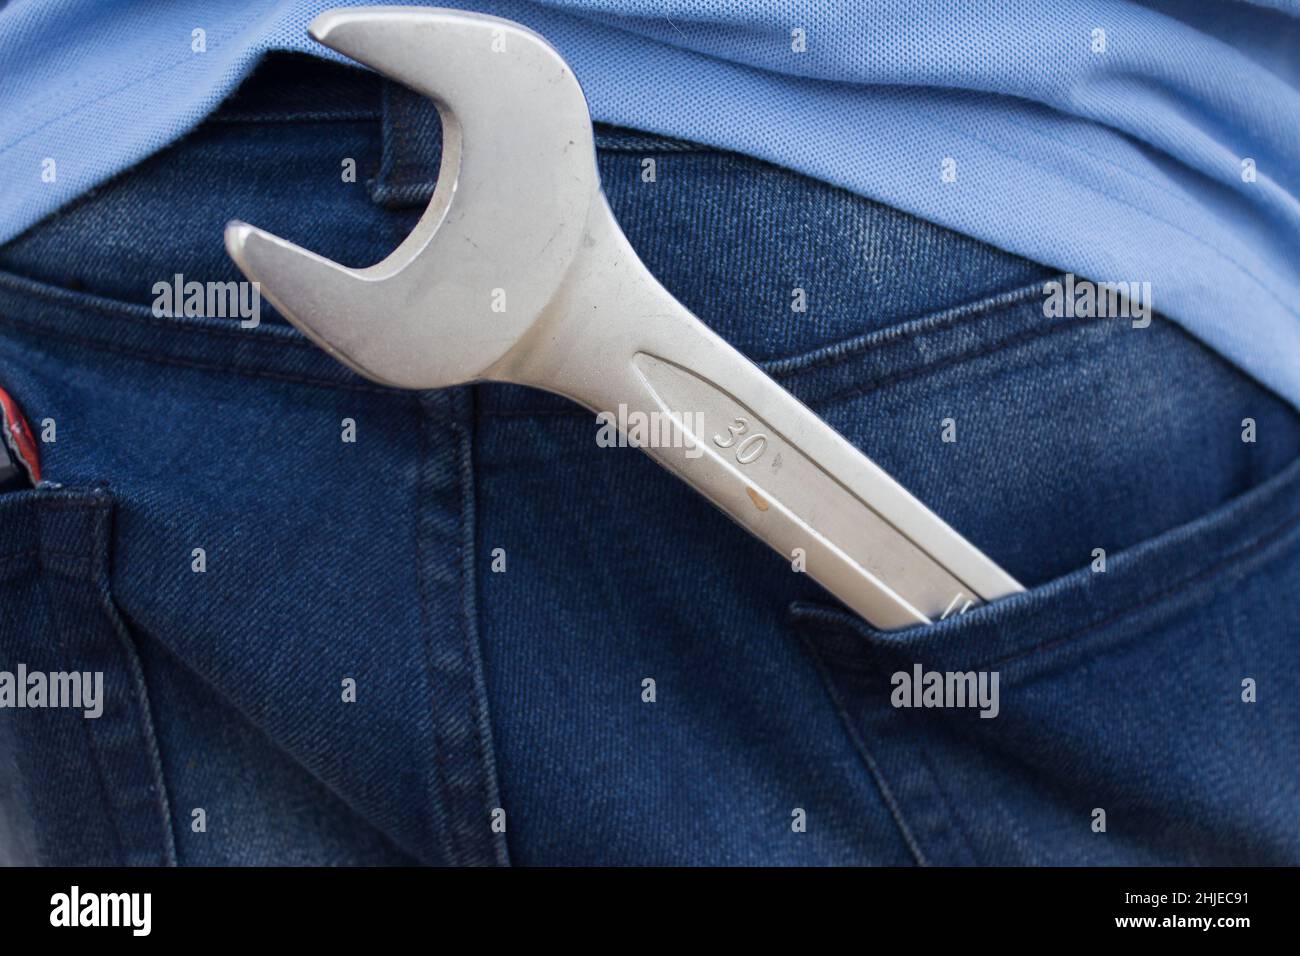 Wrench in the back pocket of jeans. Large and small wrenches as a father and son symbol. Fathers day background with dad- wrench and son - wrench. Hap Stock Photo